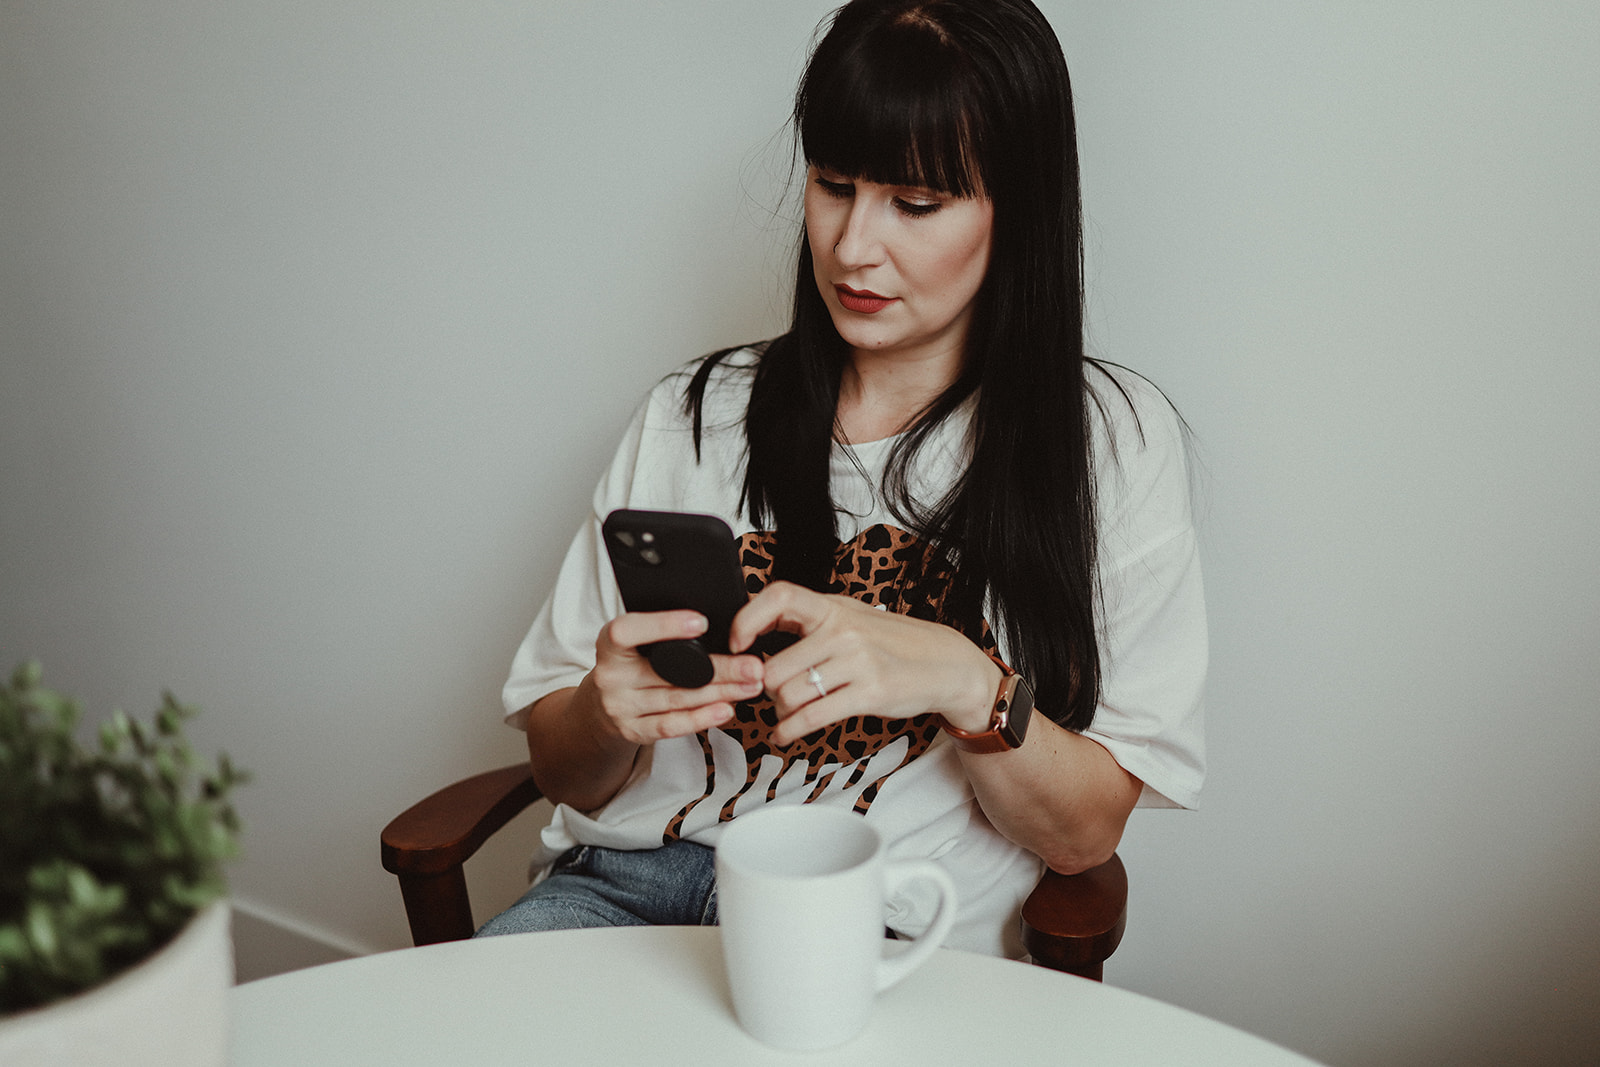 A photographer with long black hair and bangs sitting at a white table who is feeling the social media burnout scrolling on her phone while sipping a coffee trying to think of other ways to promote her photography business.